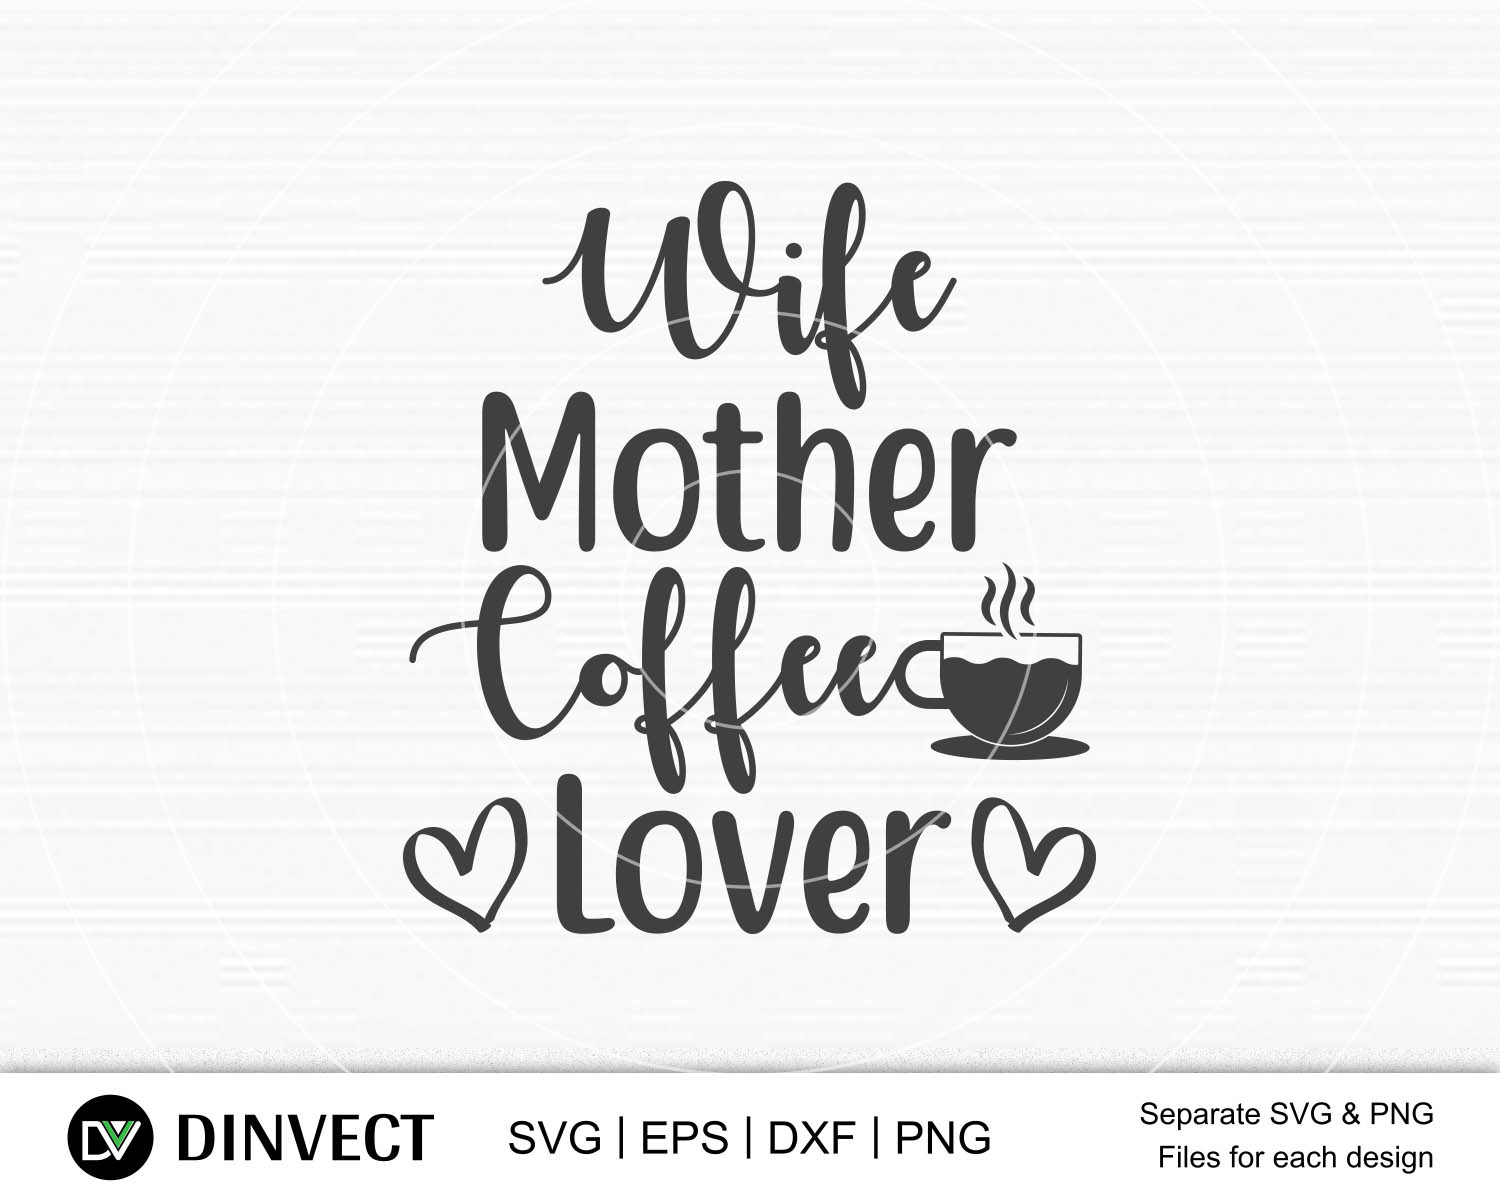 Download Wife Mother Coffee Lover Svg Mom Svg Mothers Day T Shirt Design Happy Mothers Day Svg Mother S Day Cricut Files Mom Gift Cameo Vinyl Designs Iron On Decals Cricut Cut Files Svg Eps